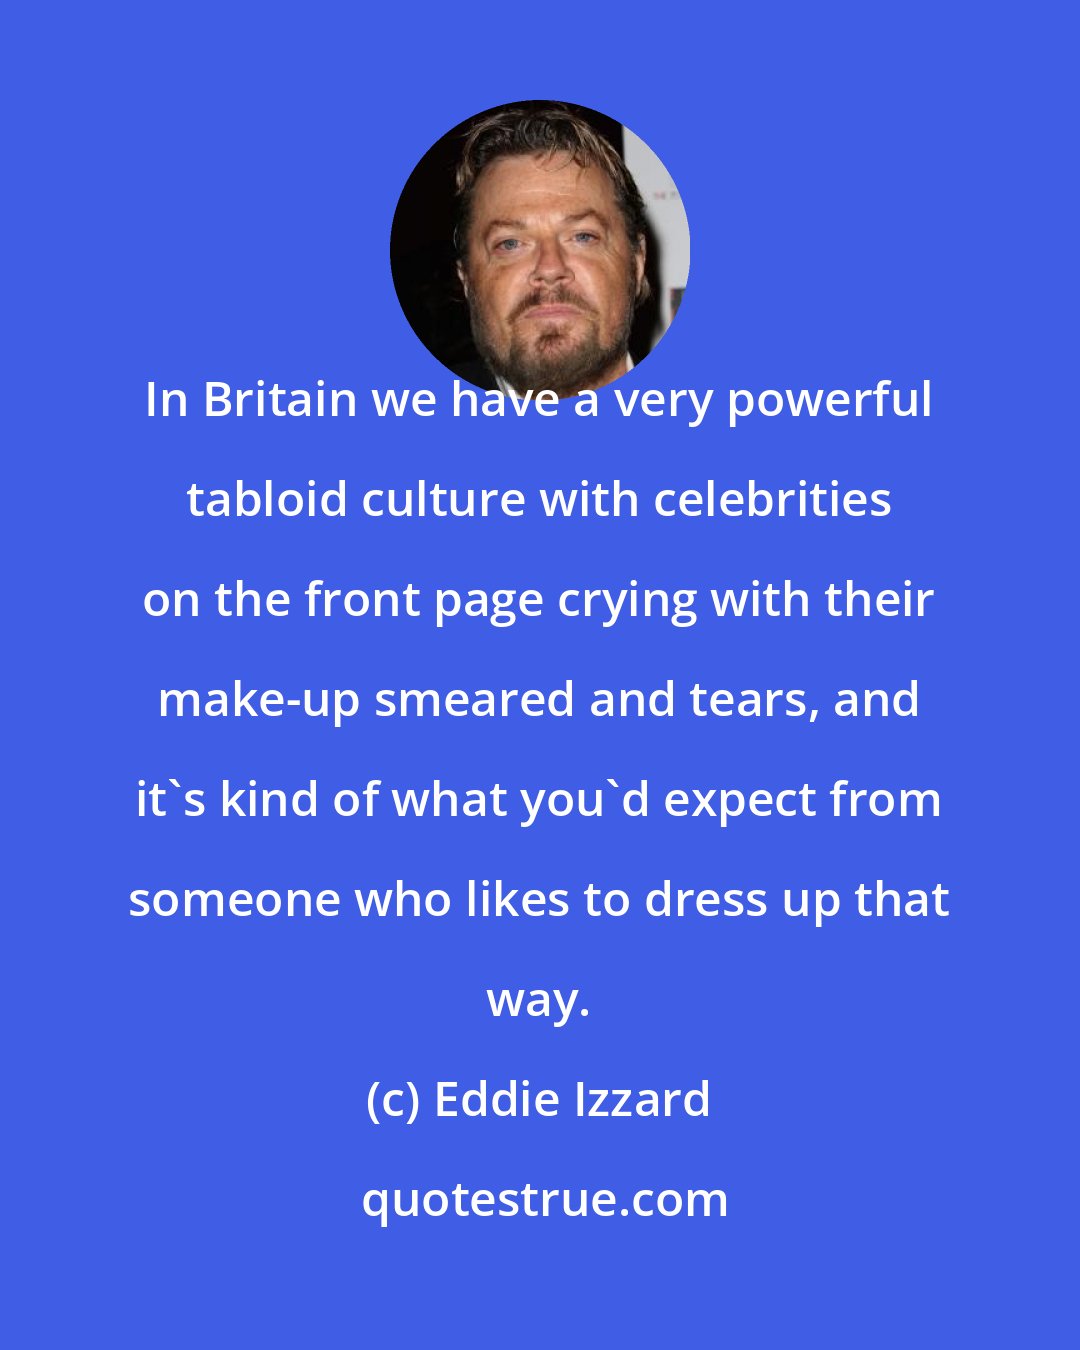 Eddie Izzard: In Britain we have a very powerful tabloid culture with celebrities on the front page crying with their make-up smeared and tears, and it's kind of what you'd expect from someone who likes to dress up that way.